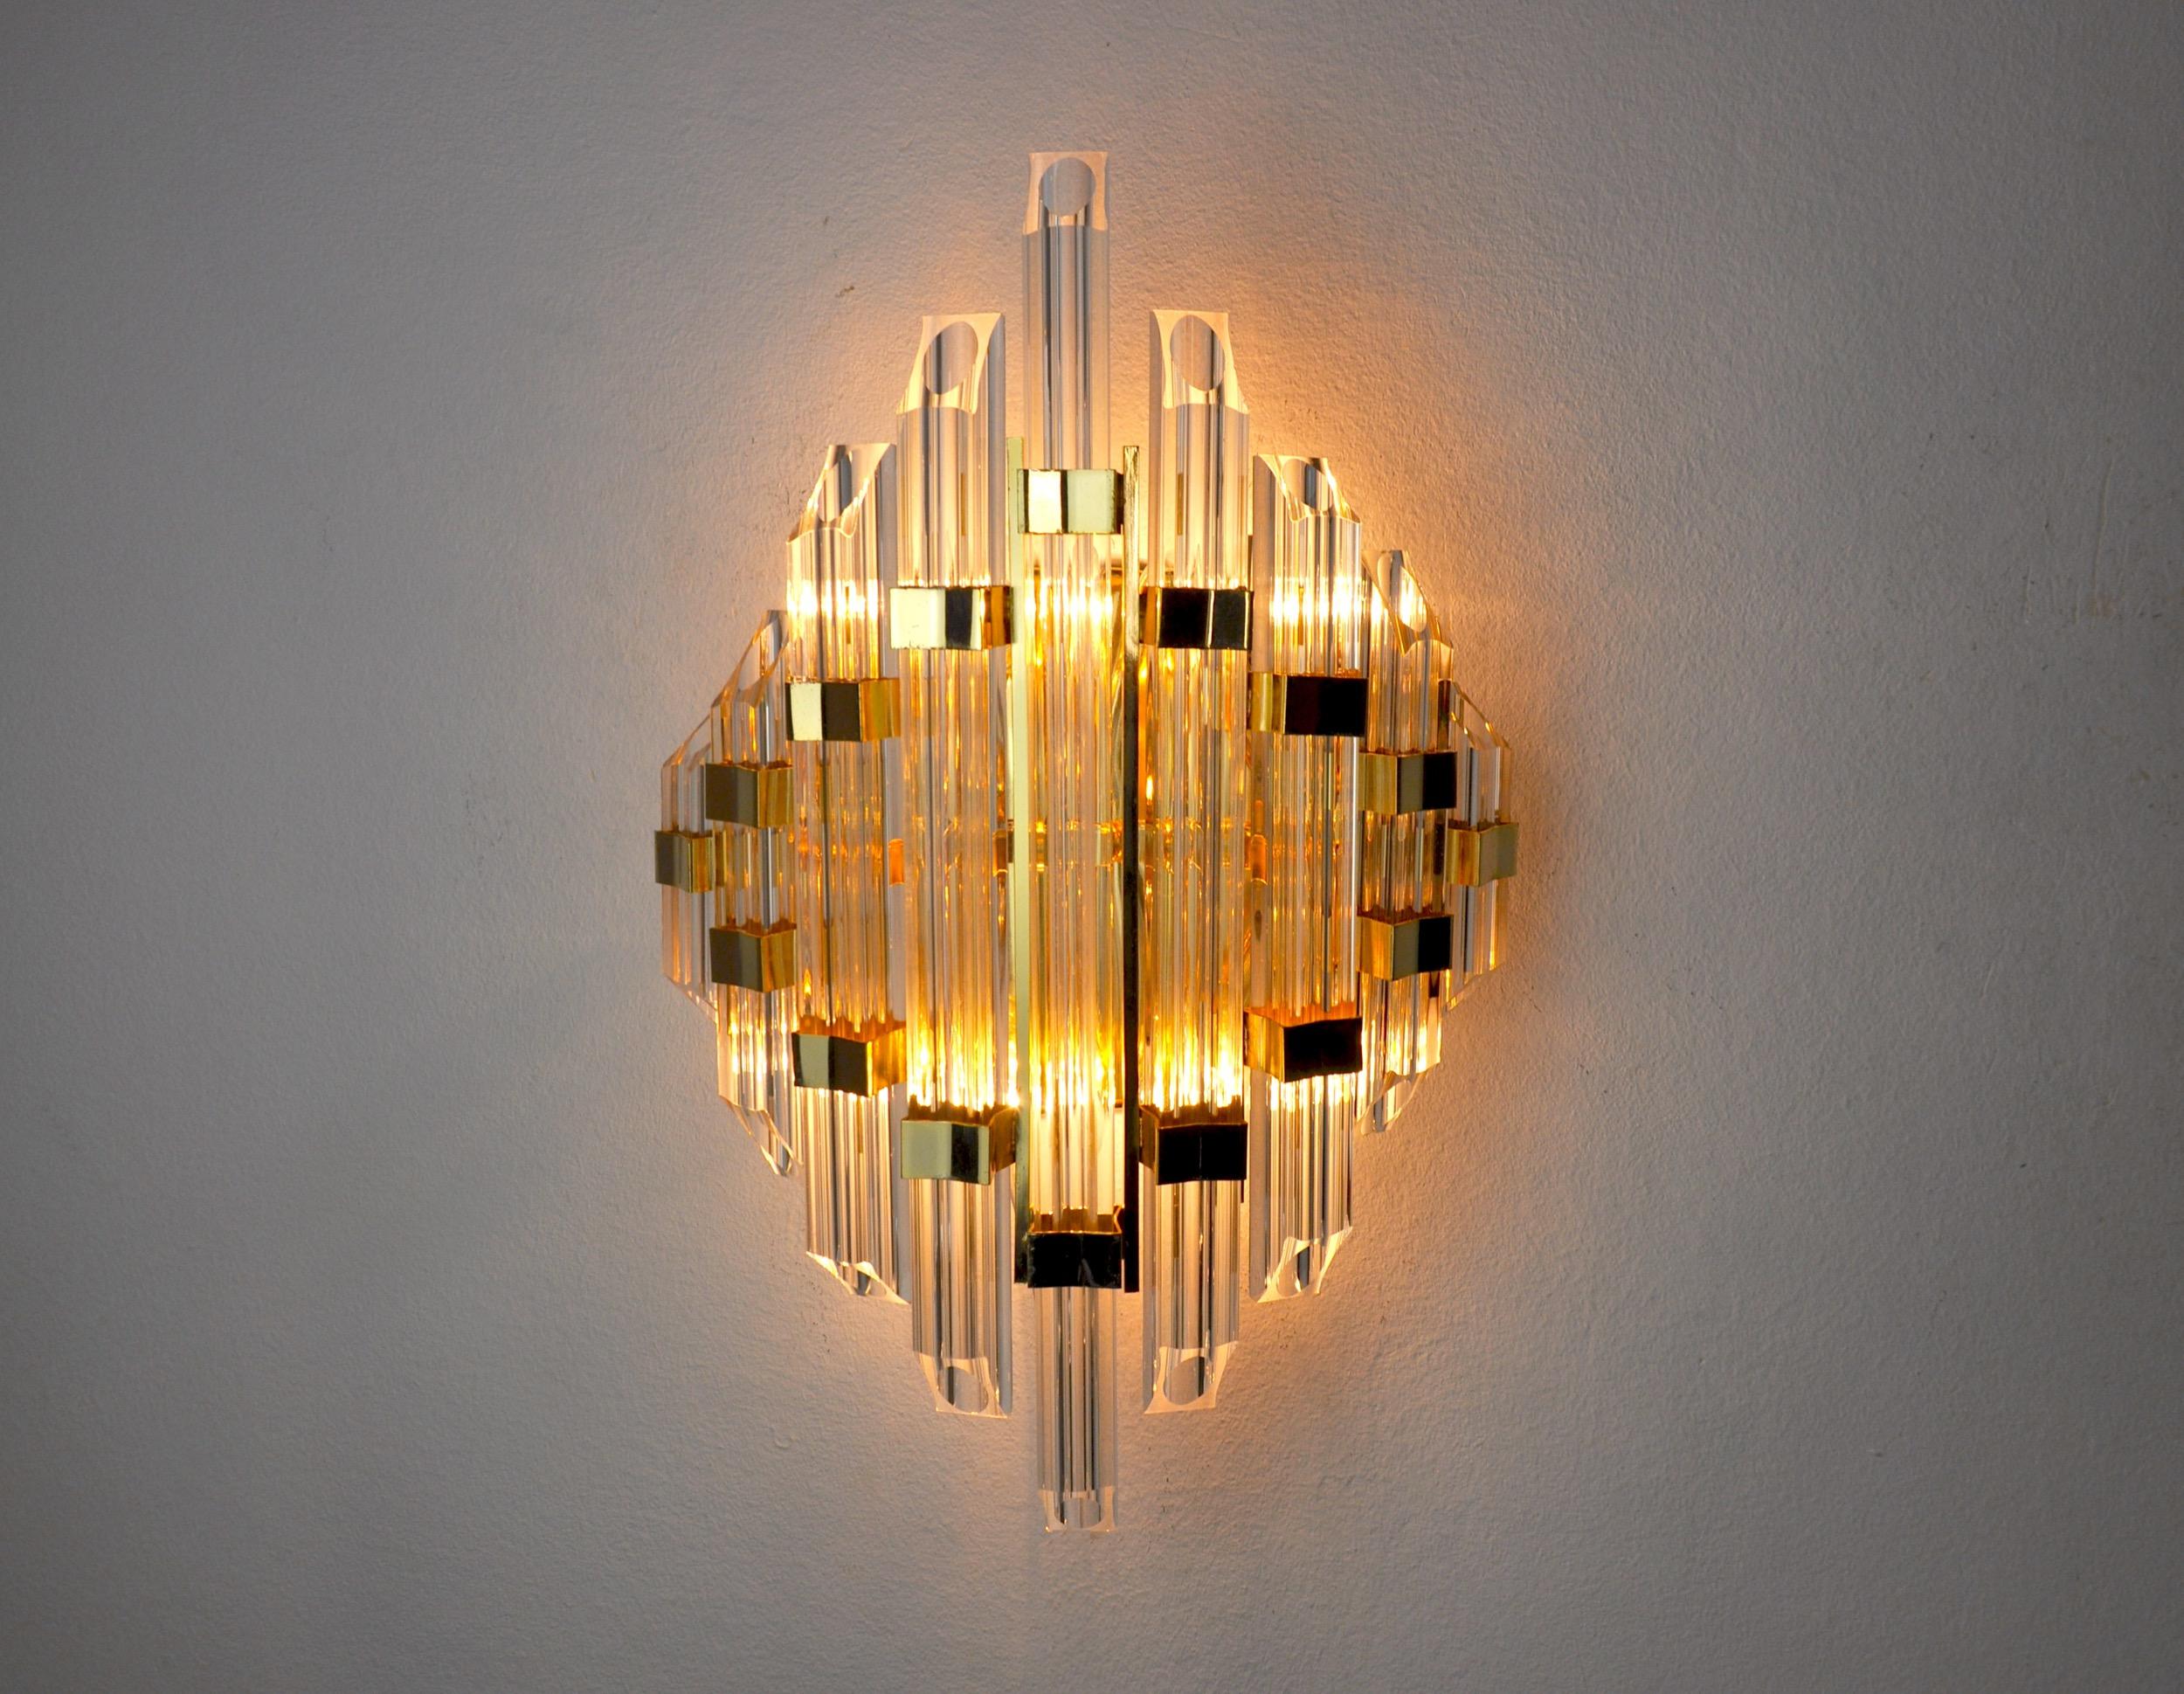 Very beautiful and large tubular venini wall lamp designated and produced in italy in the 70s.

Tubular cut glass and gilded metal structure.

Unique object that will illuminate and bring a real design touch to your interior.

Verified